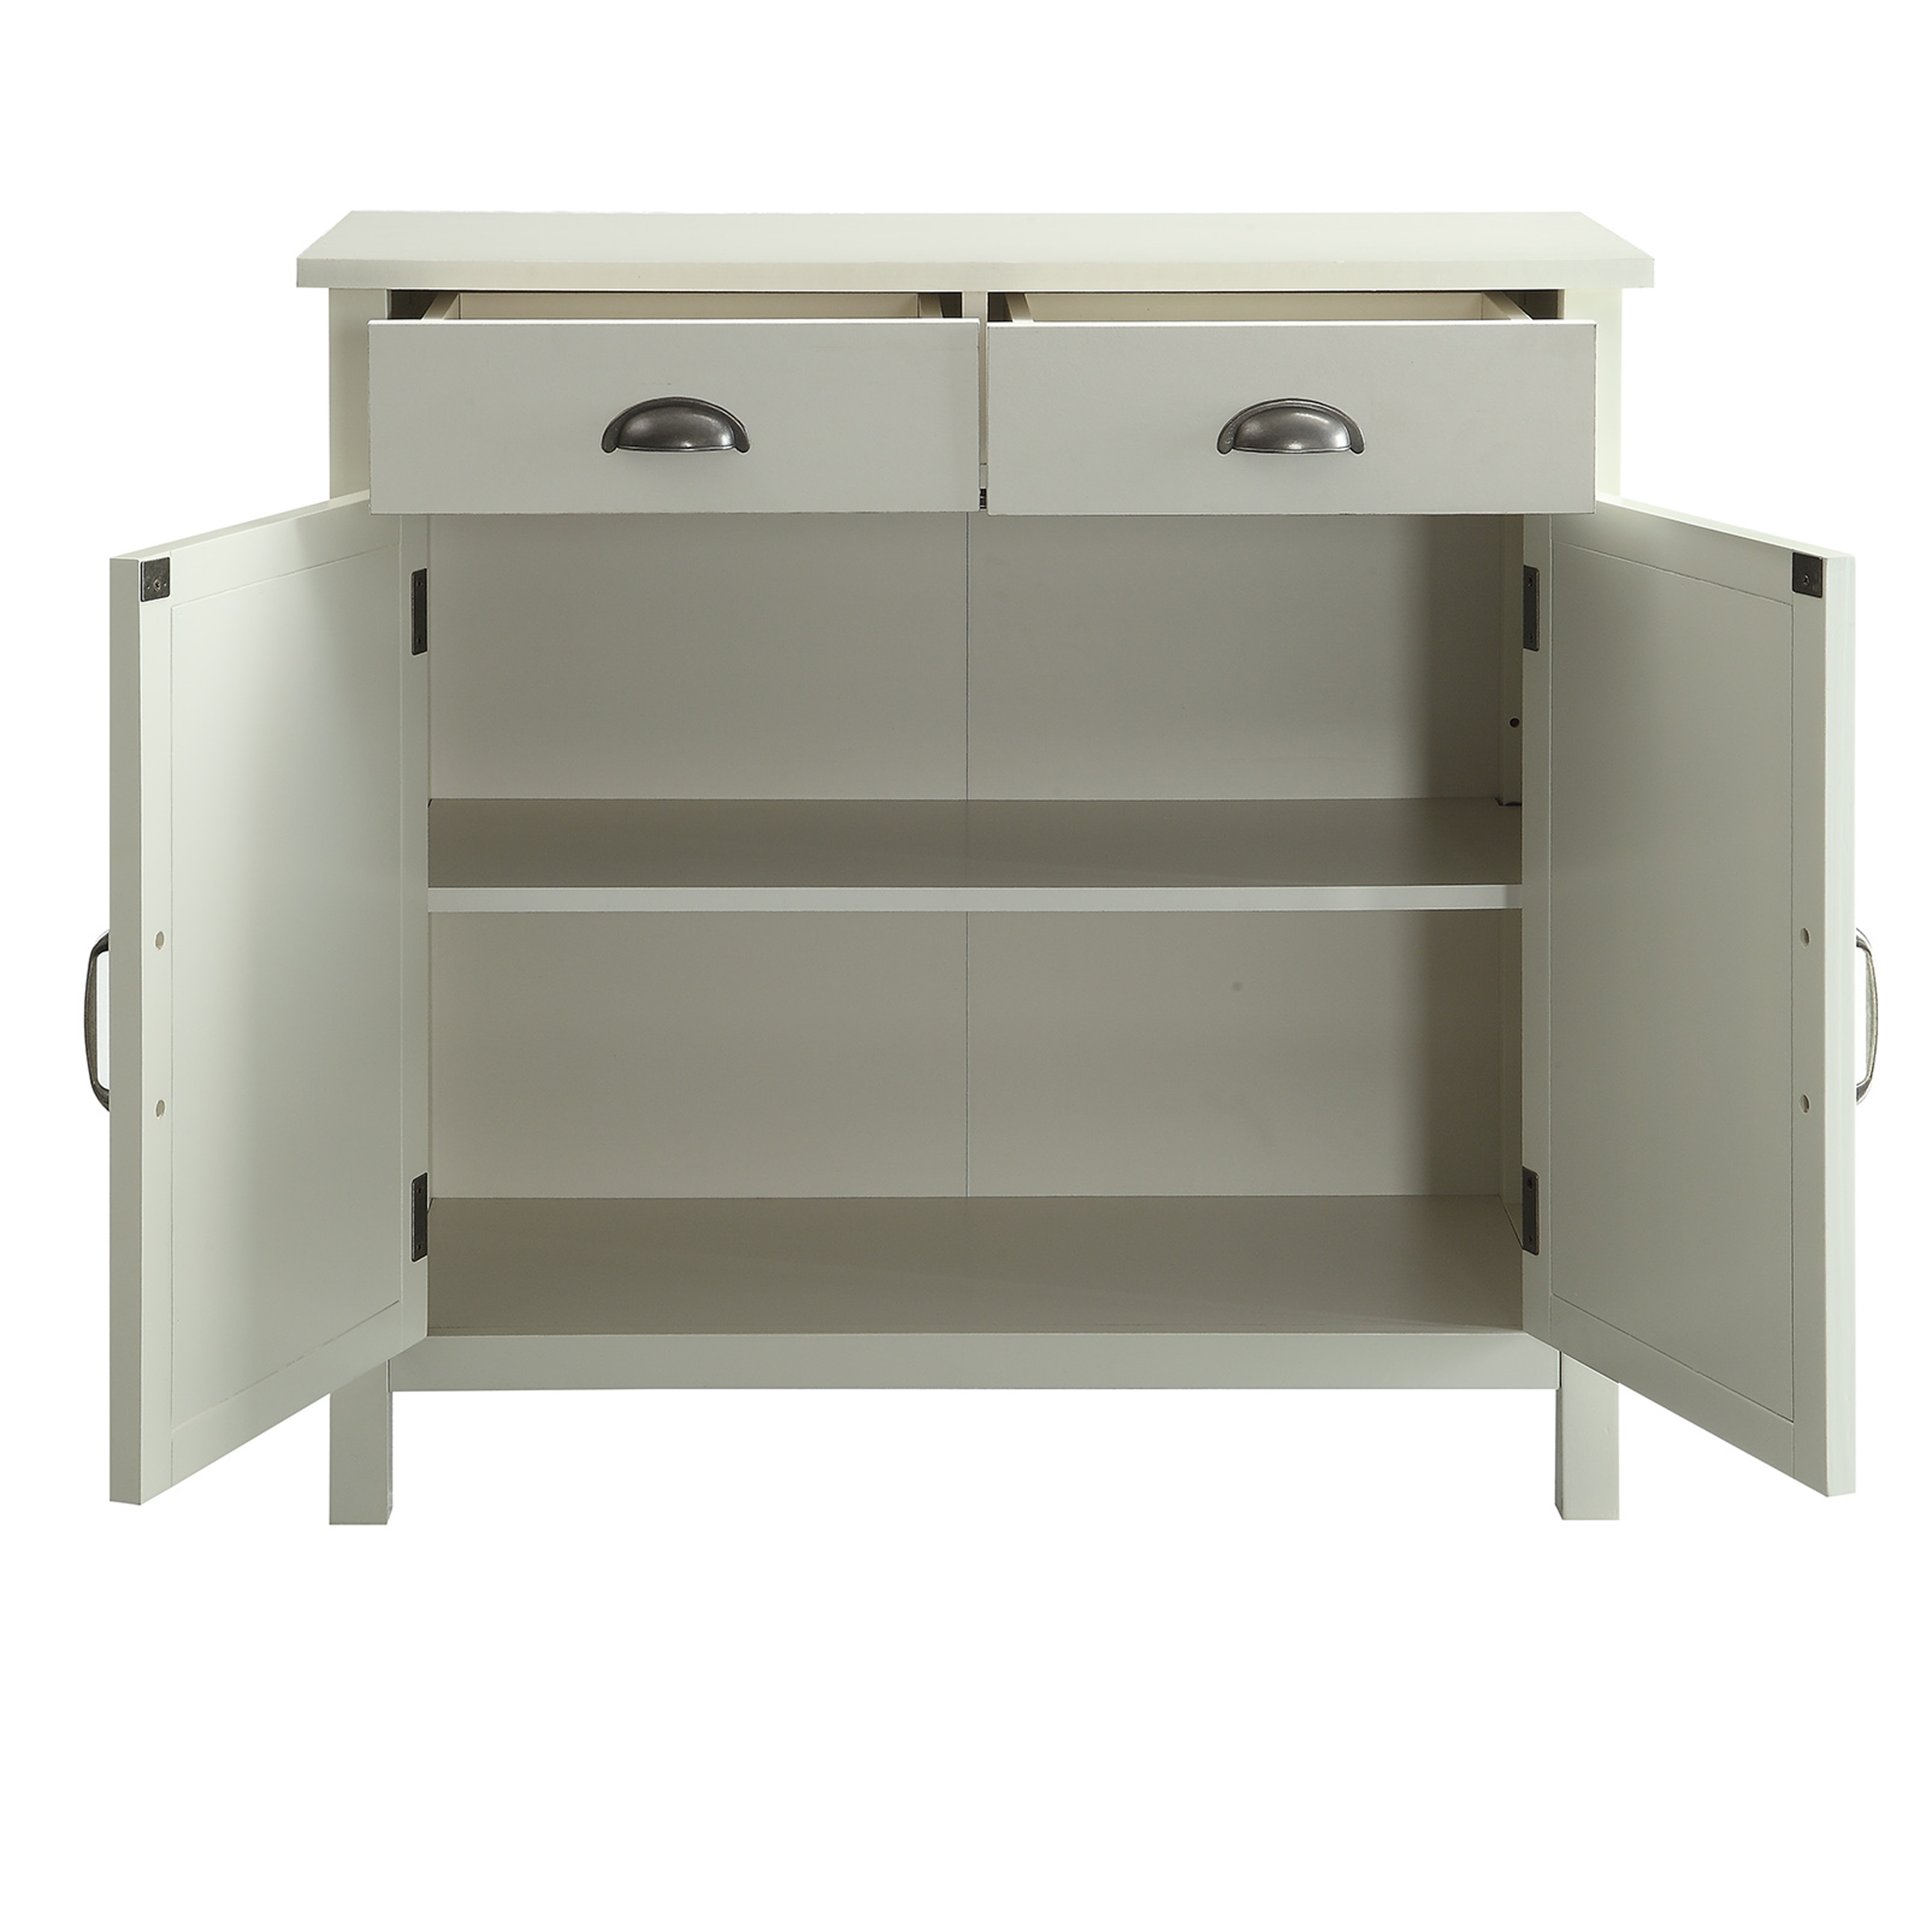 Accent Cabinet 2 Shutter Doors + 2 Drawers 32"Lx14"Wx31"H. By Belray